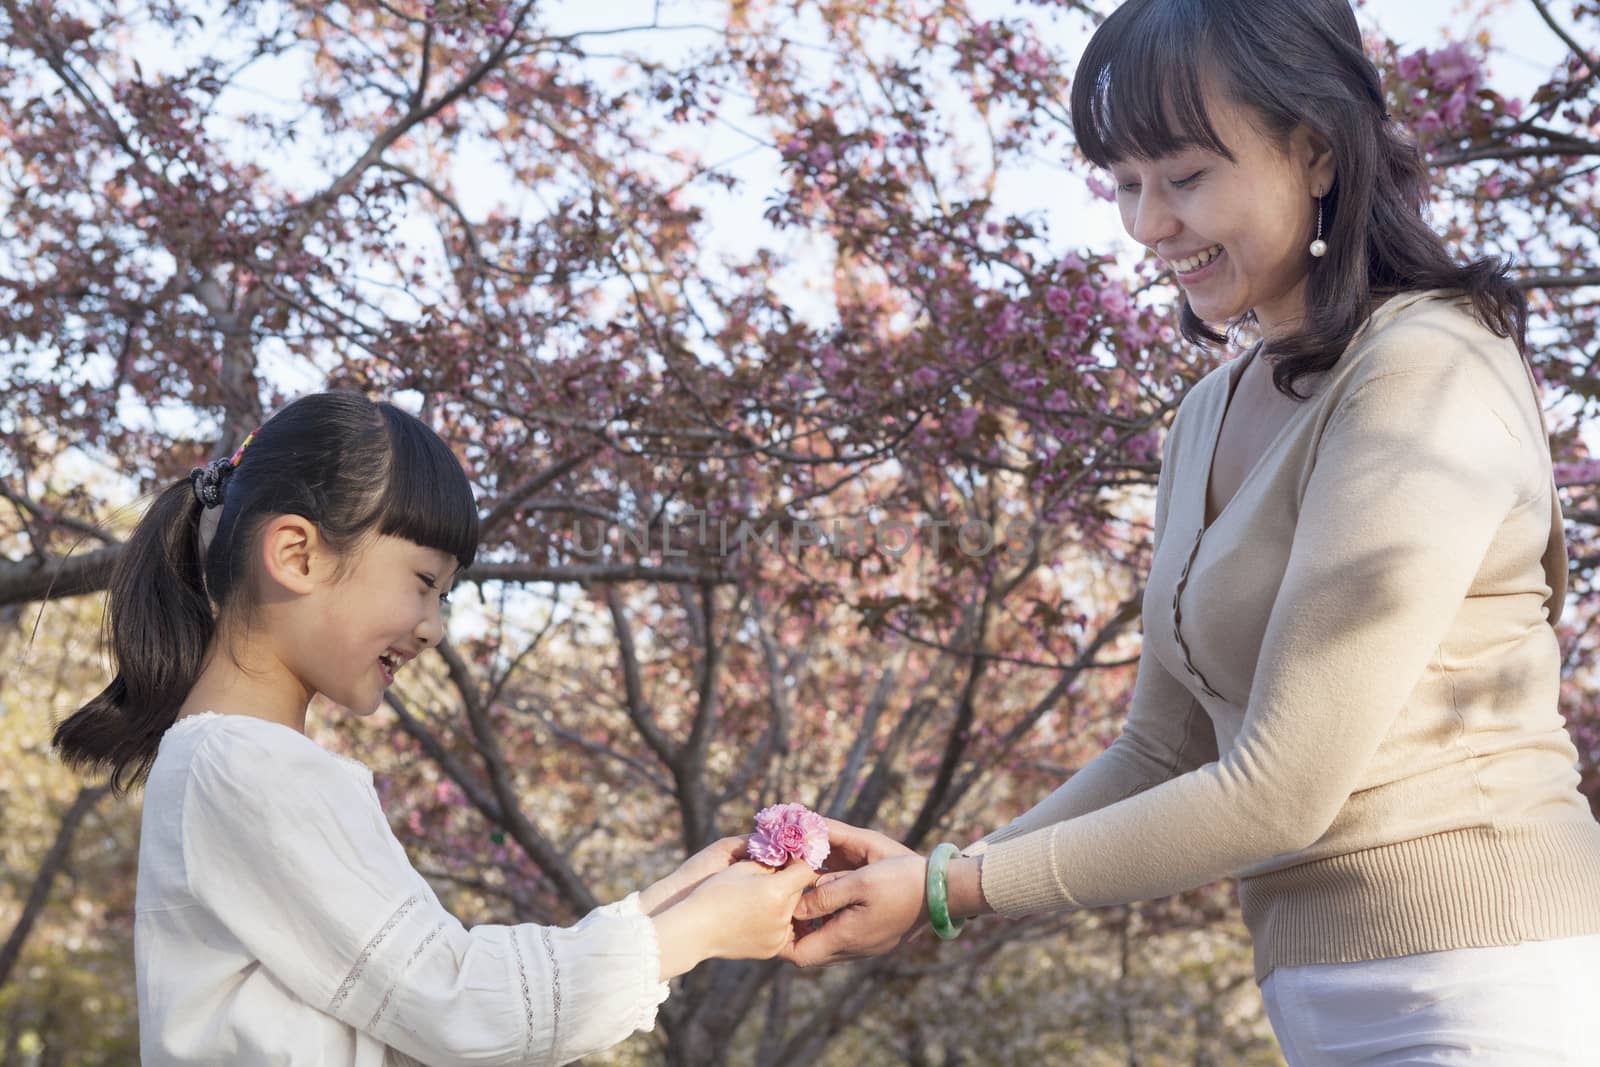 Smiling mother giving her daughter a cherry blossom outside in the park in the springtime, Beijing by XiXinXing